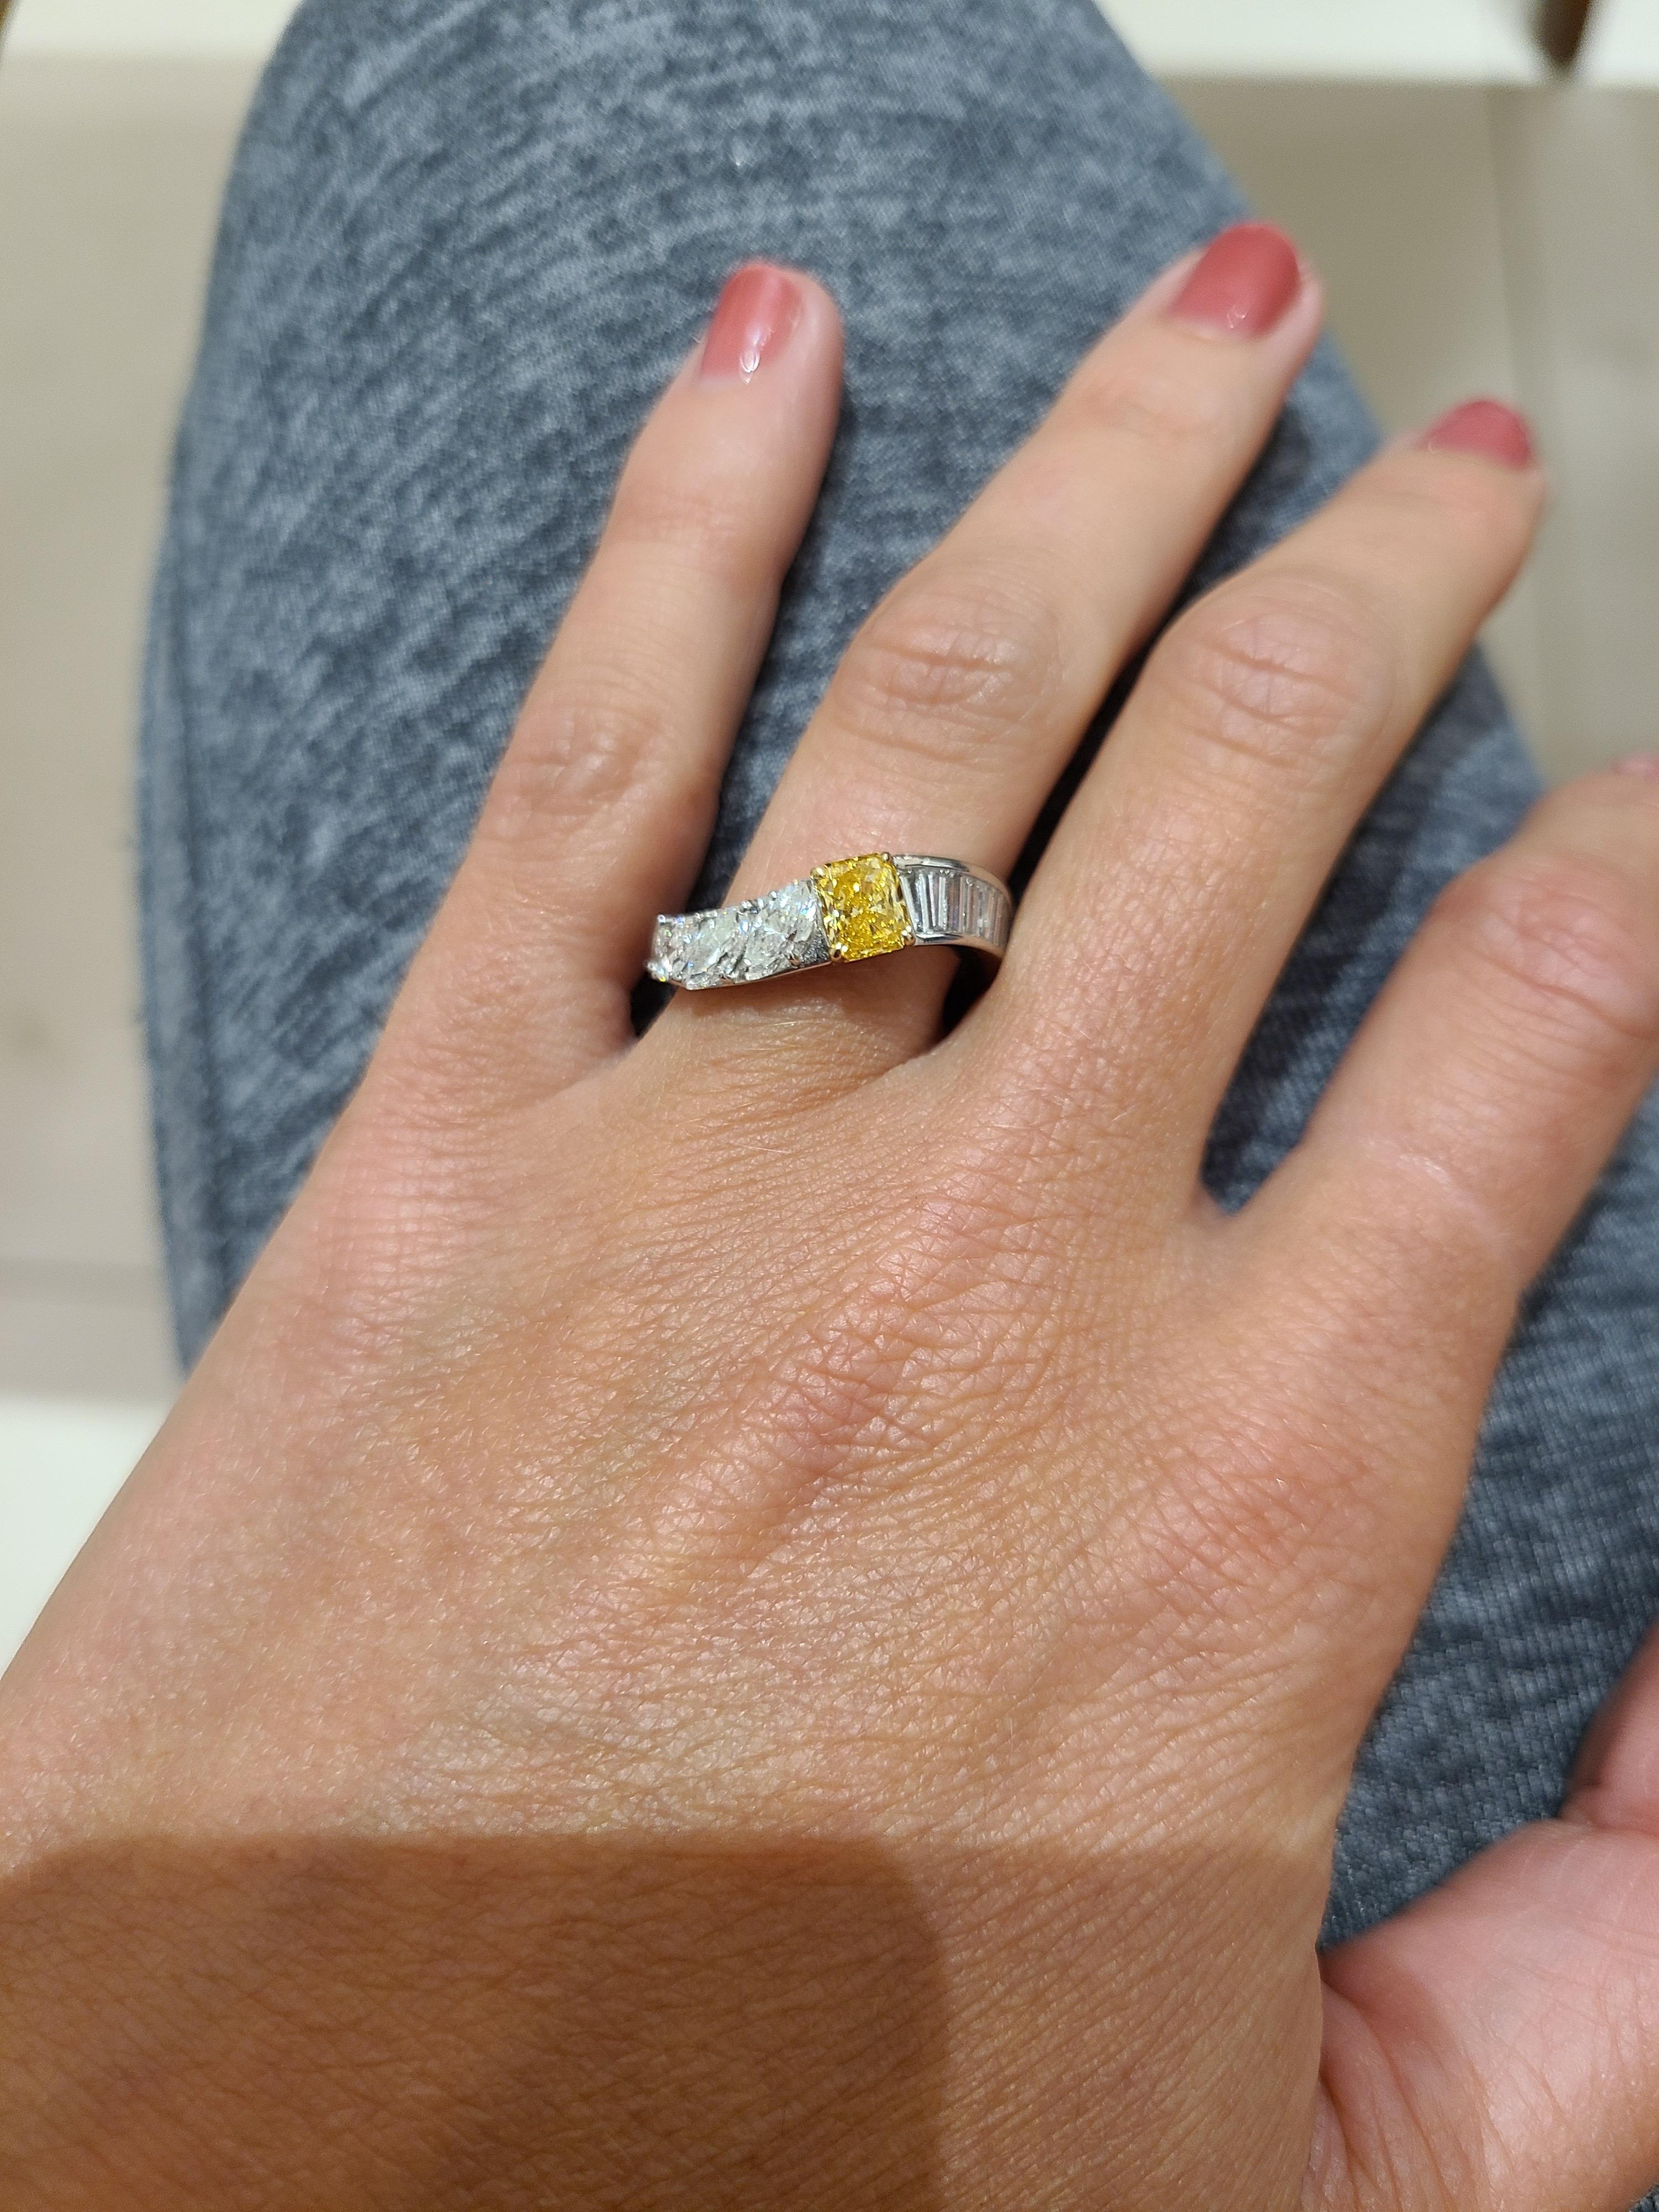 18kt WG, GIA  .52 Ct. Fancy Intense Orange Yellow Diamond Band Ring In New Condition For Sale In New York, NY